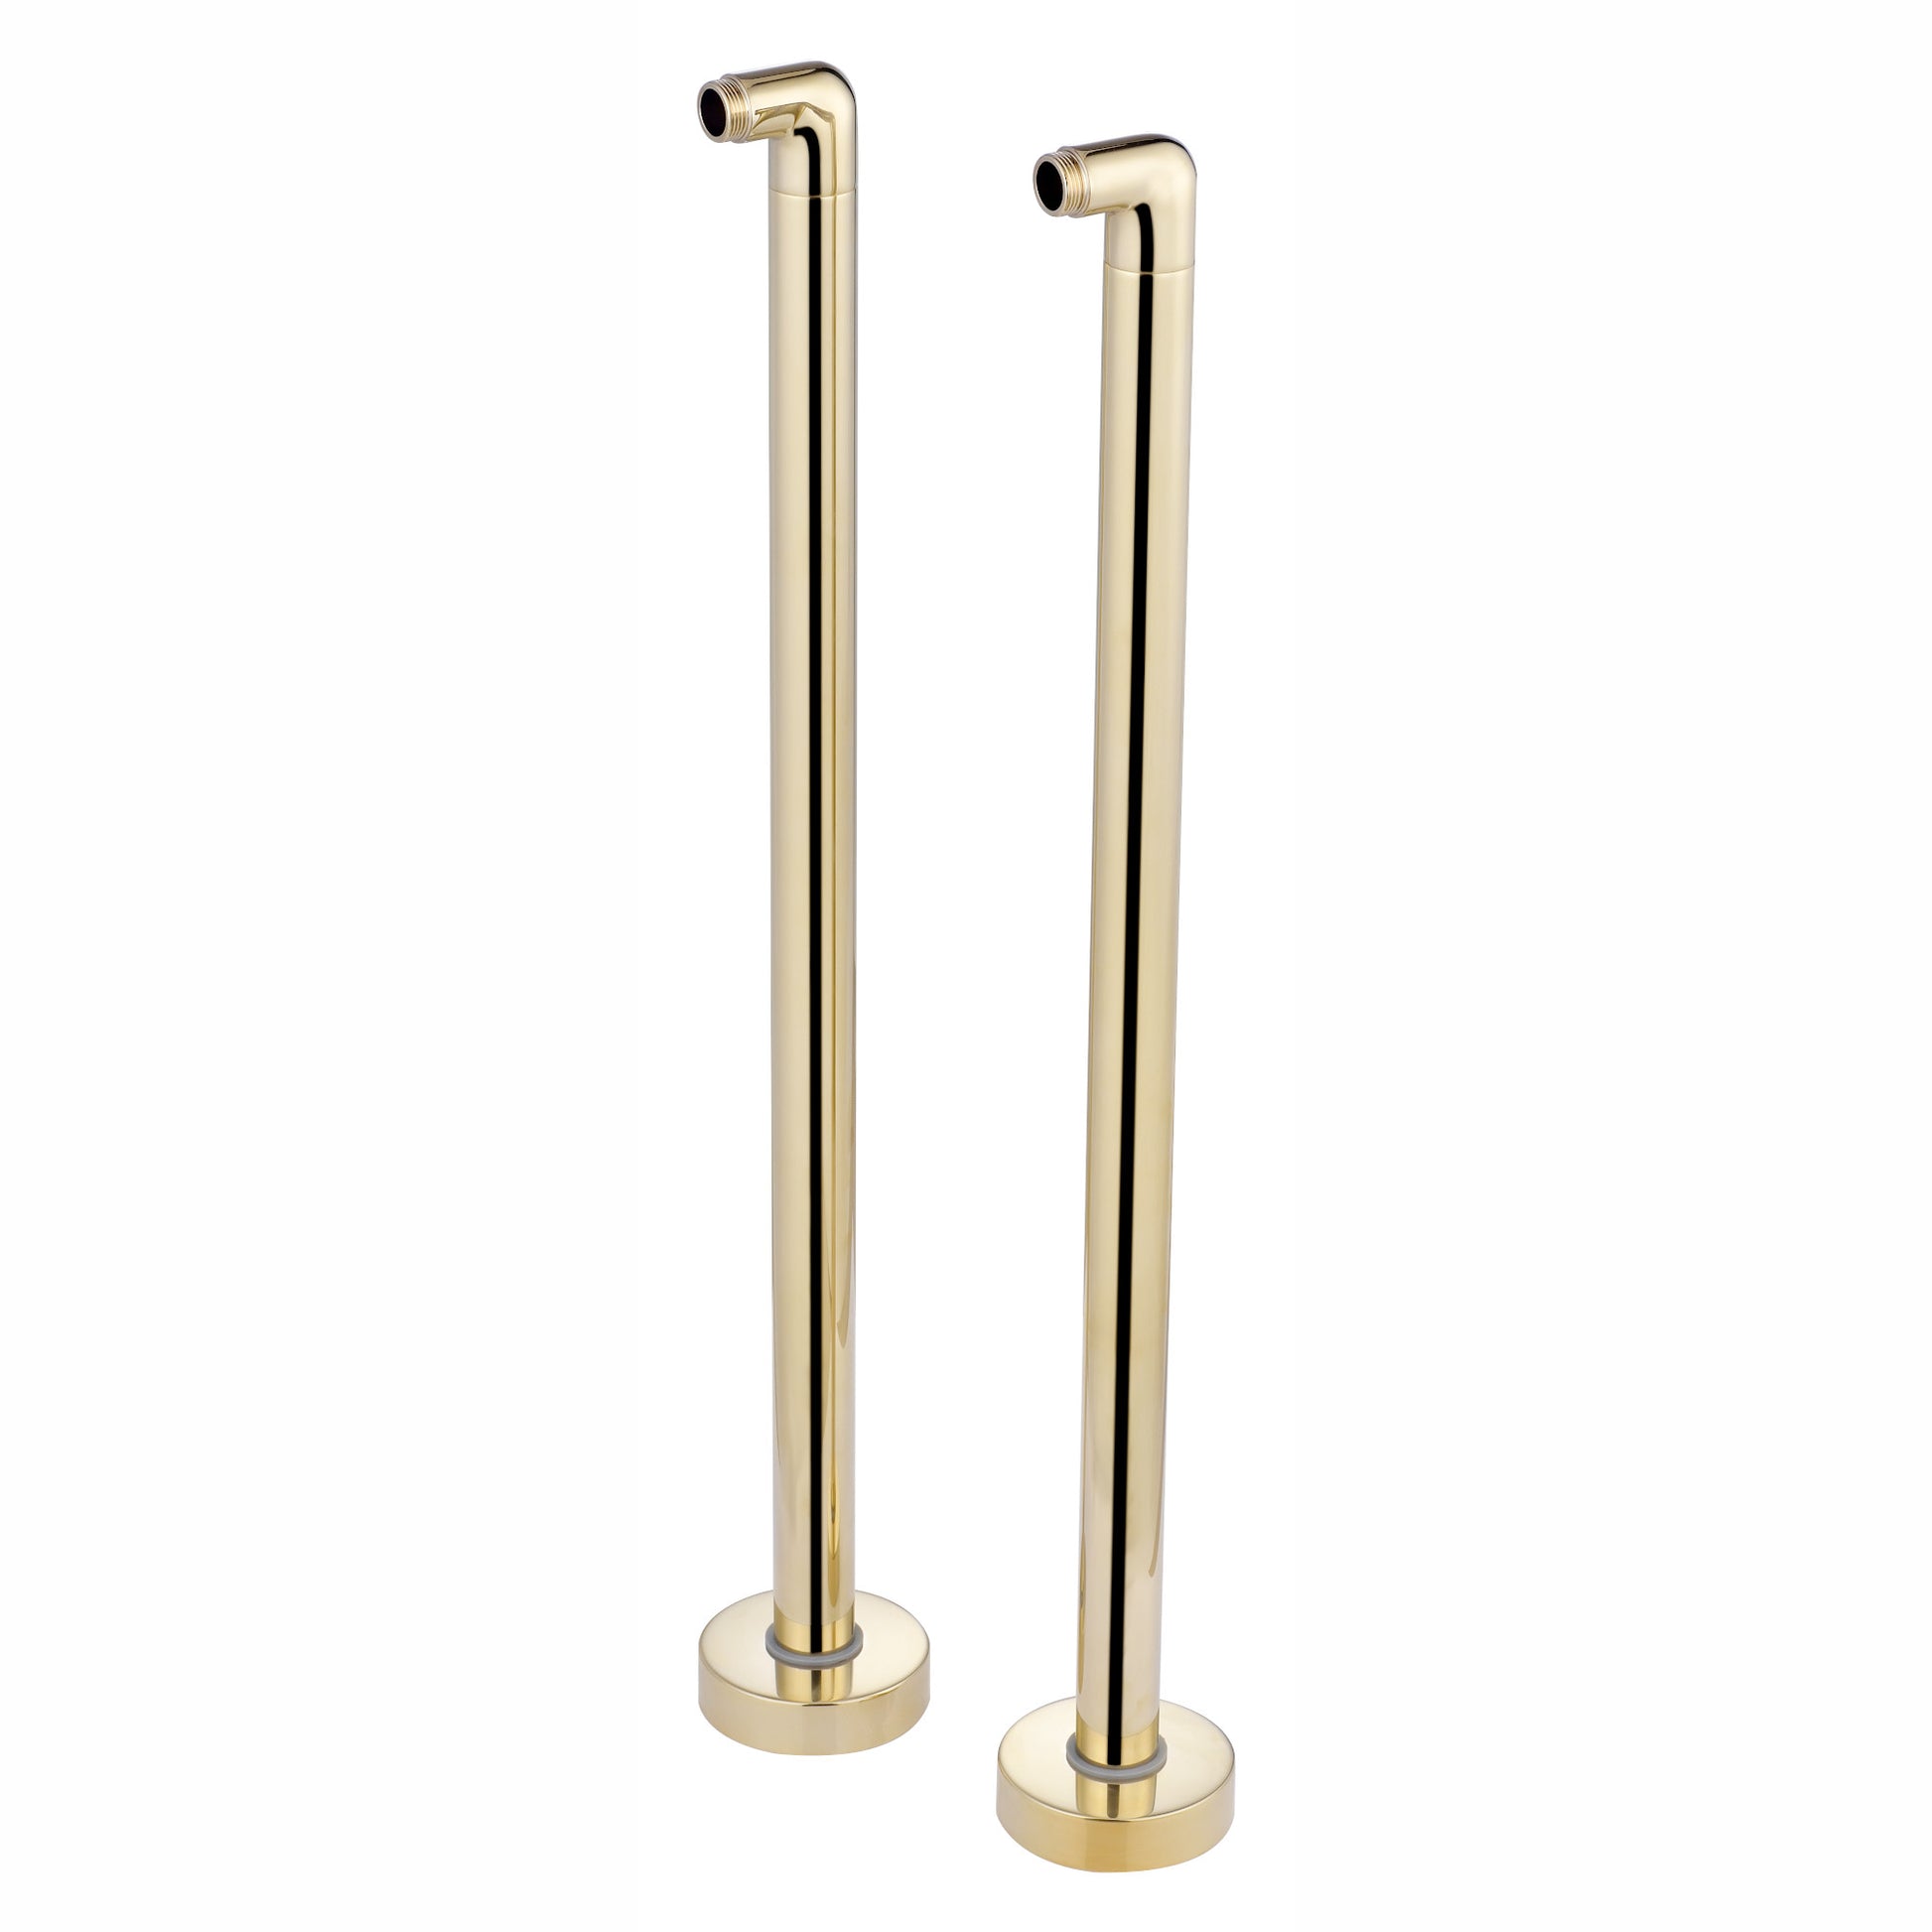 Traditional floor standing bath tap legs with return elbows - English gold - Taps